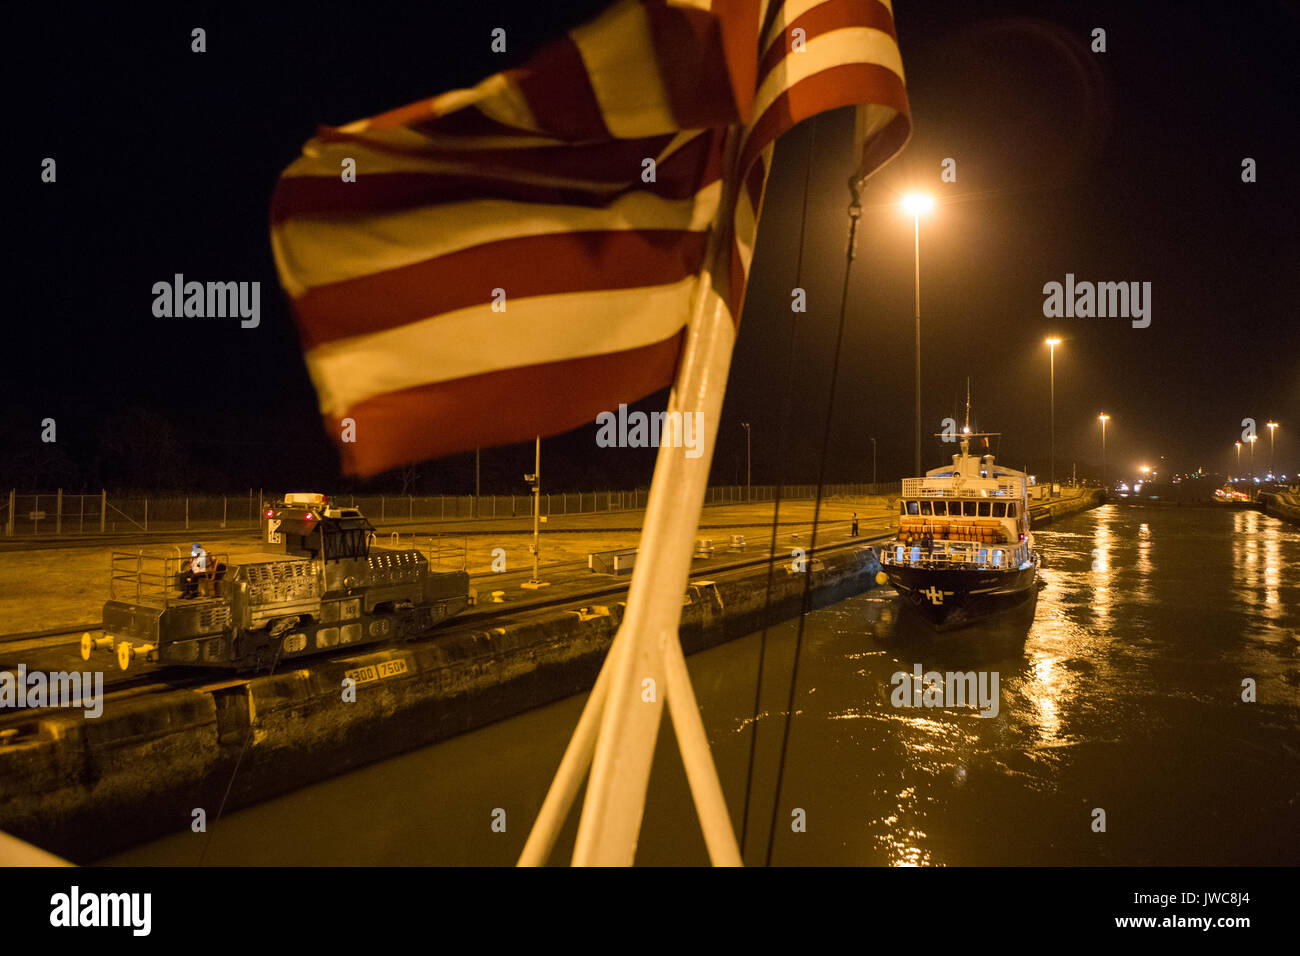 As the American flag bellows in the wind,a vessel and cruise ship are guided through the Gatun Locks of the Panama Canal. Stock Photo